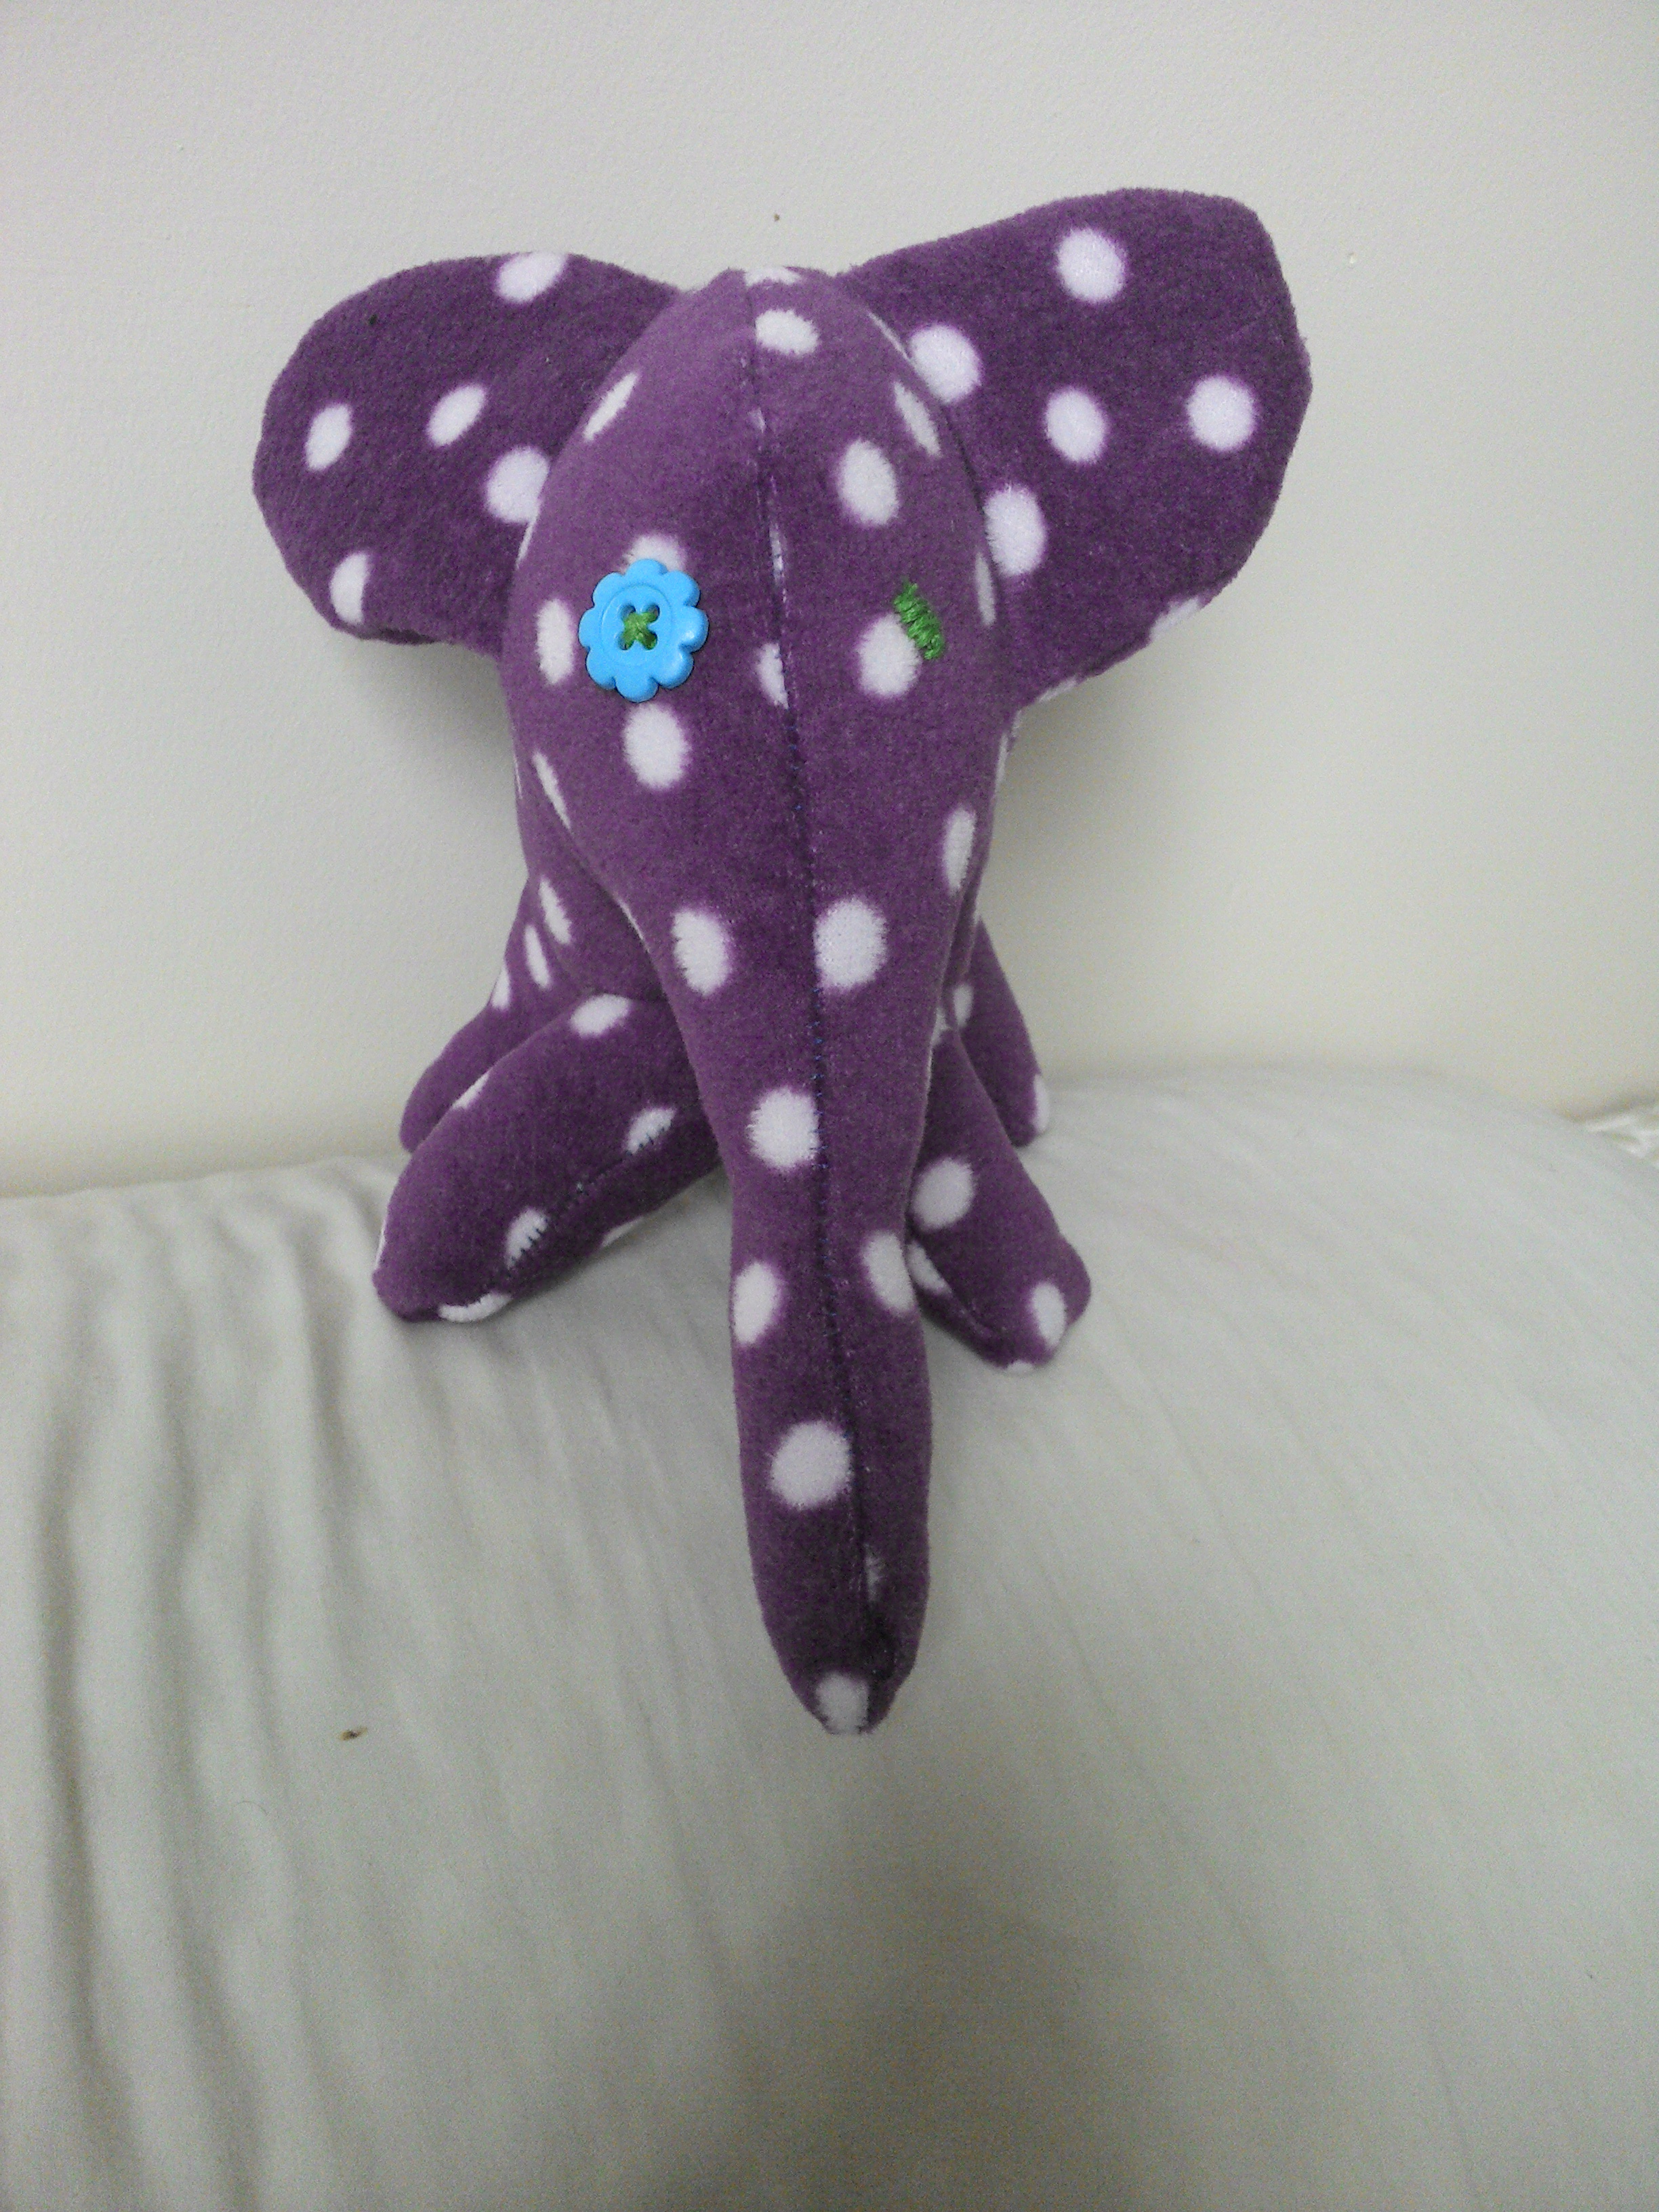 Lille - Upcycled - From Onesie to Stuffed Toy Elephant